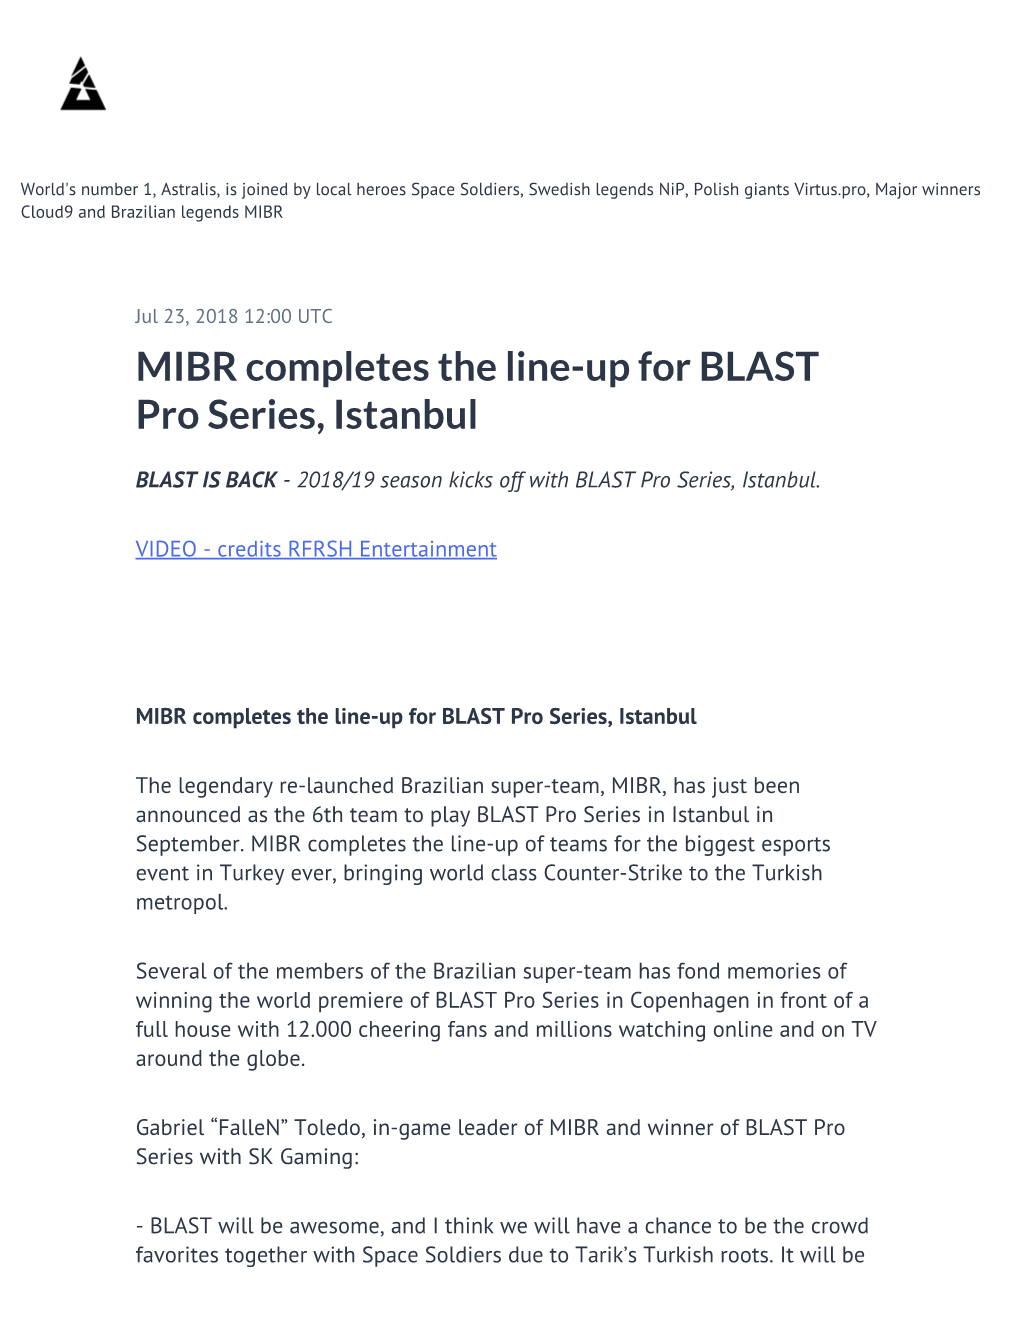 MIBR Completes the Line-Up for BLAST Pro Series, Istanbul